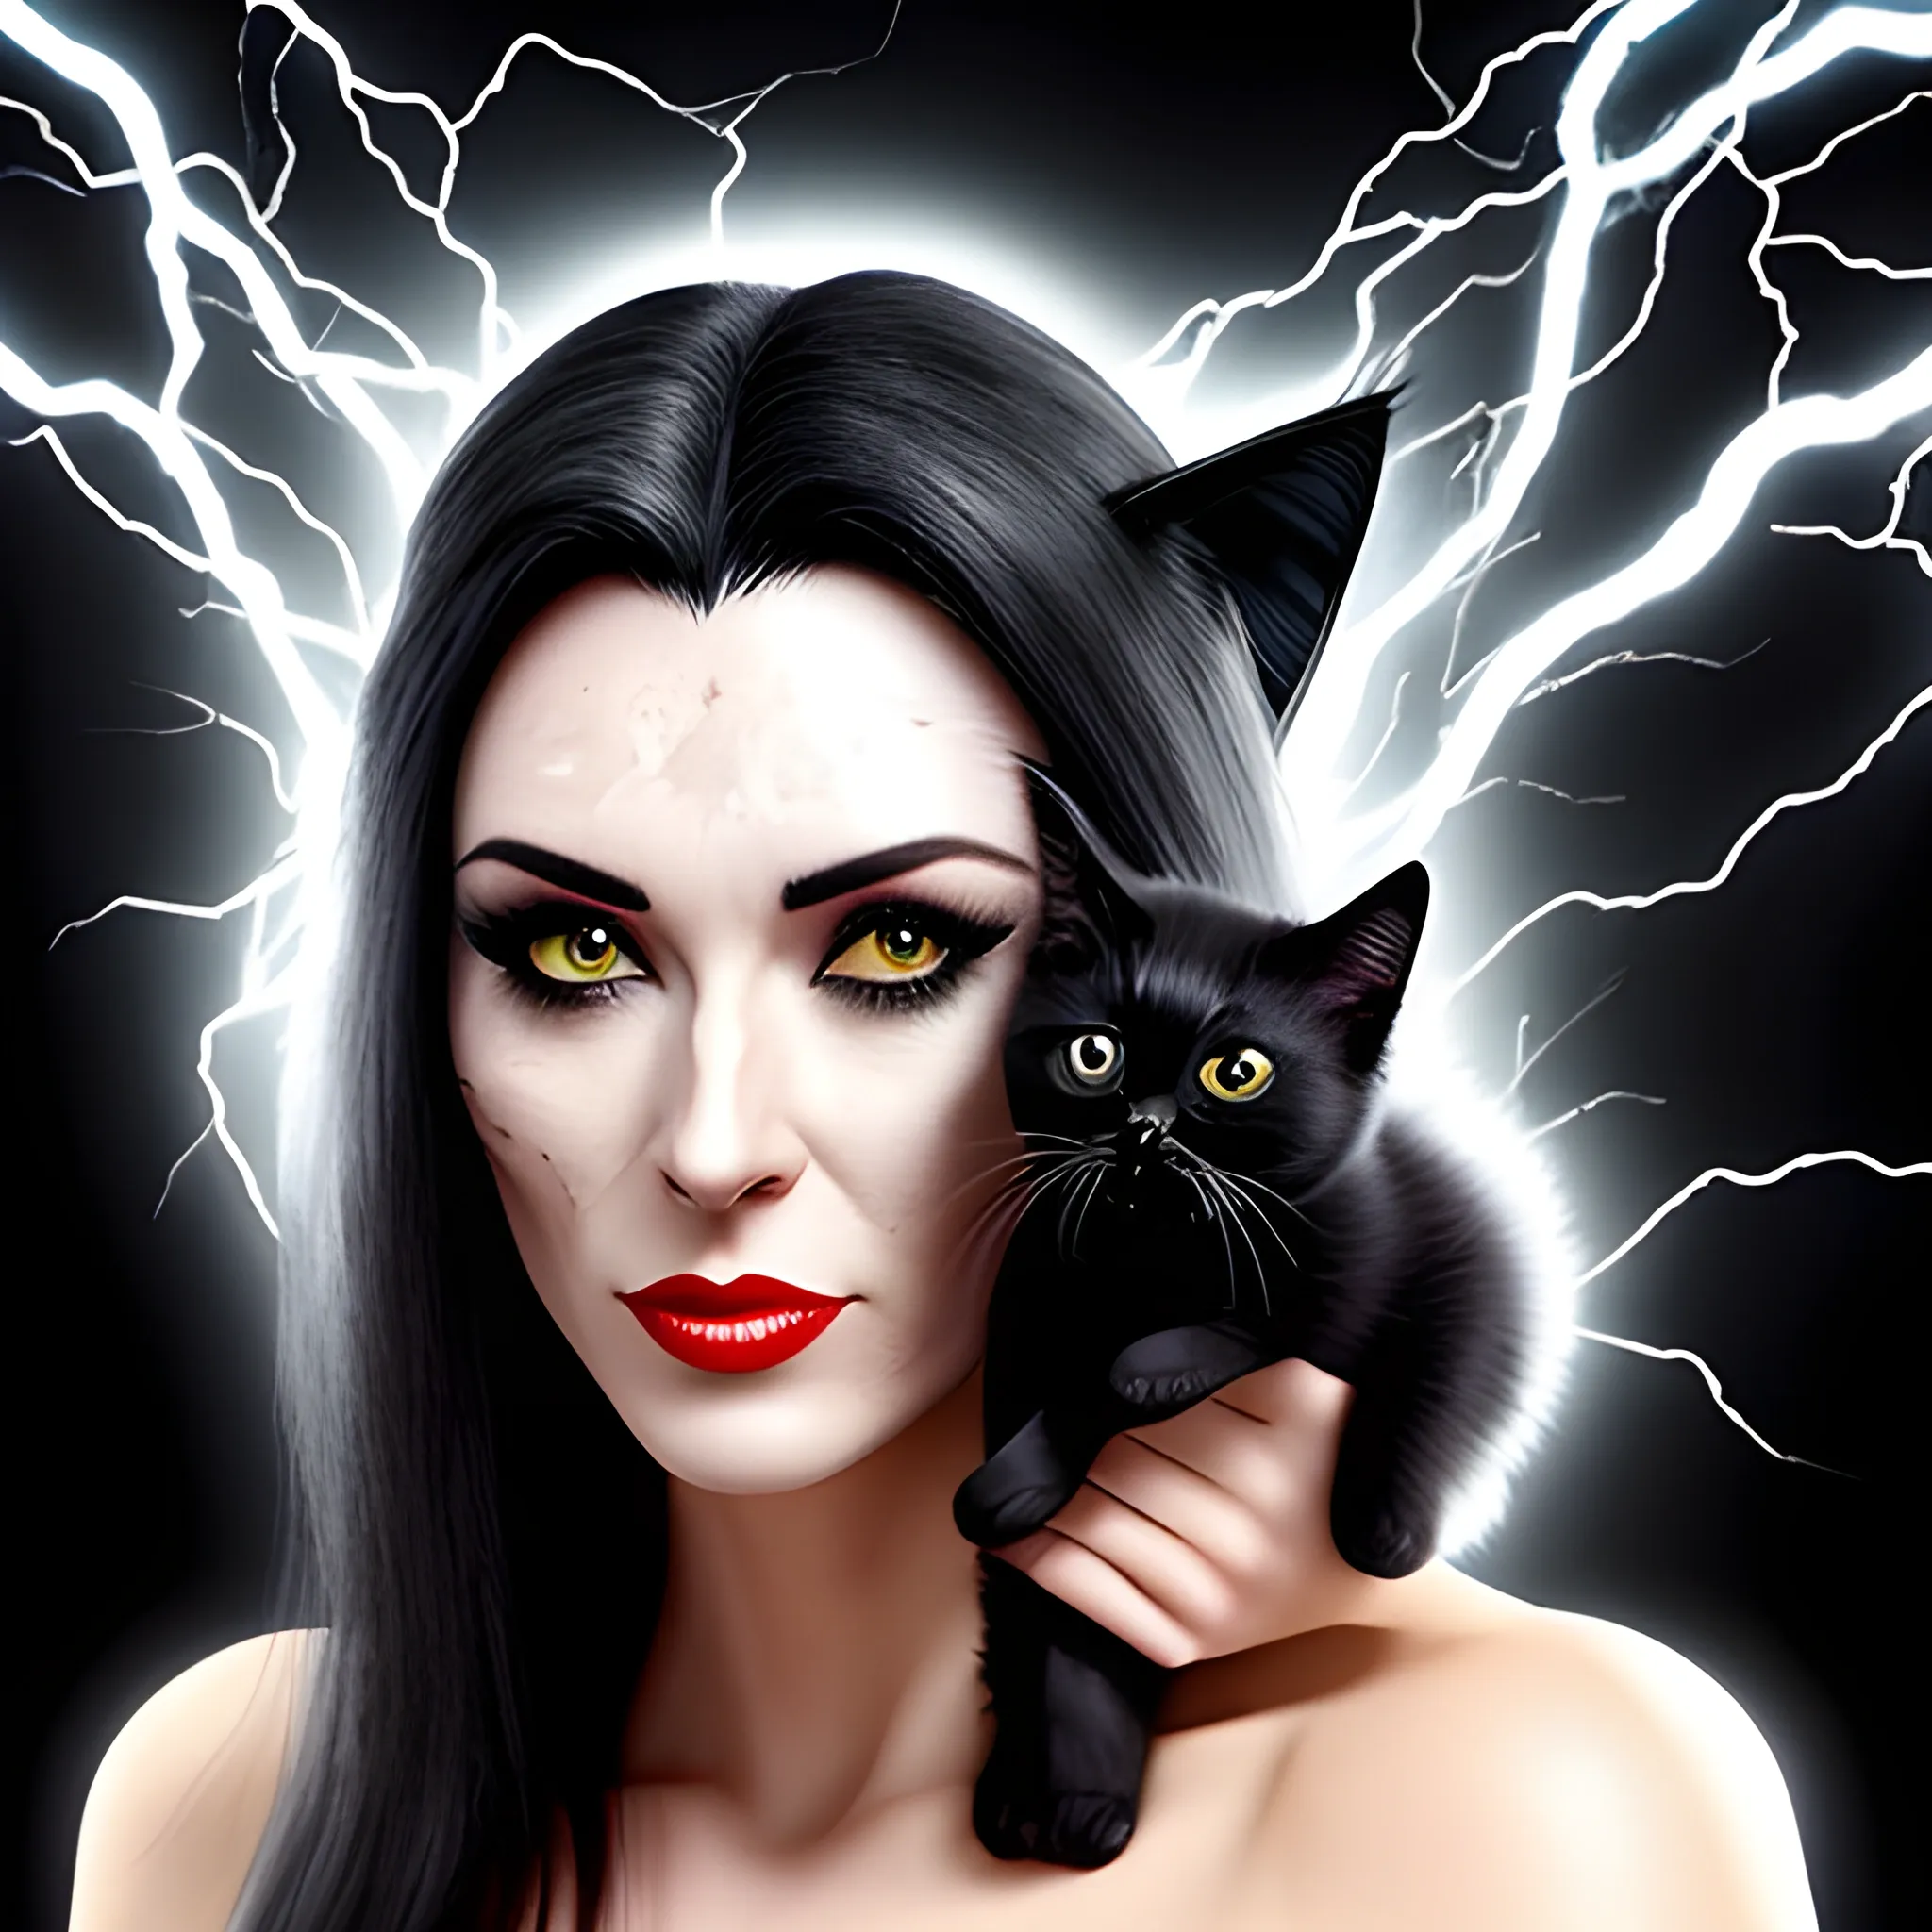 Little, tiny cute, human girl child, holding Black kitten with, silver strikes, of lightening blot on forehead, and lightening blots on rest of body, 3D